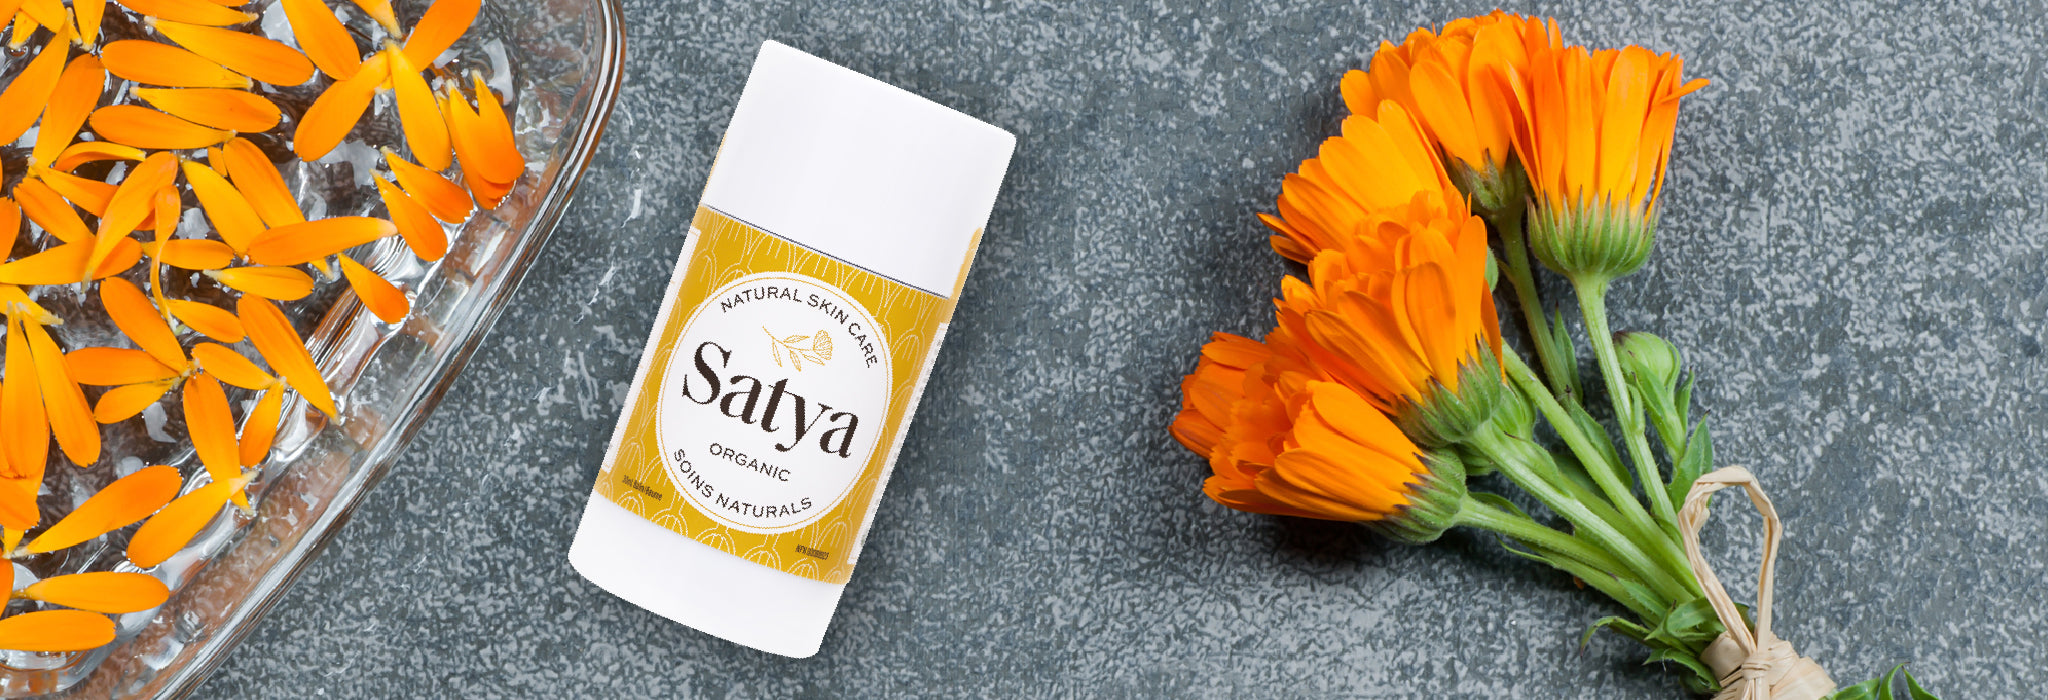 How To Refill Your Satya Stick